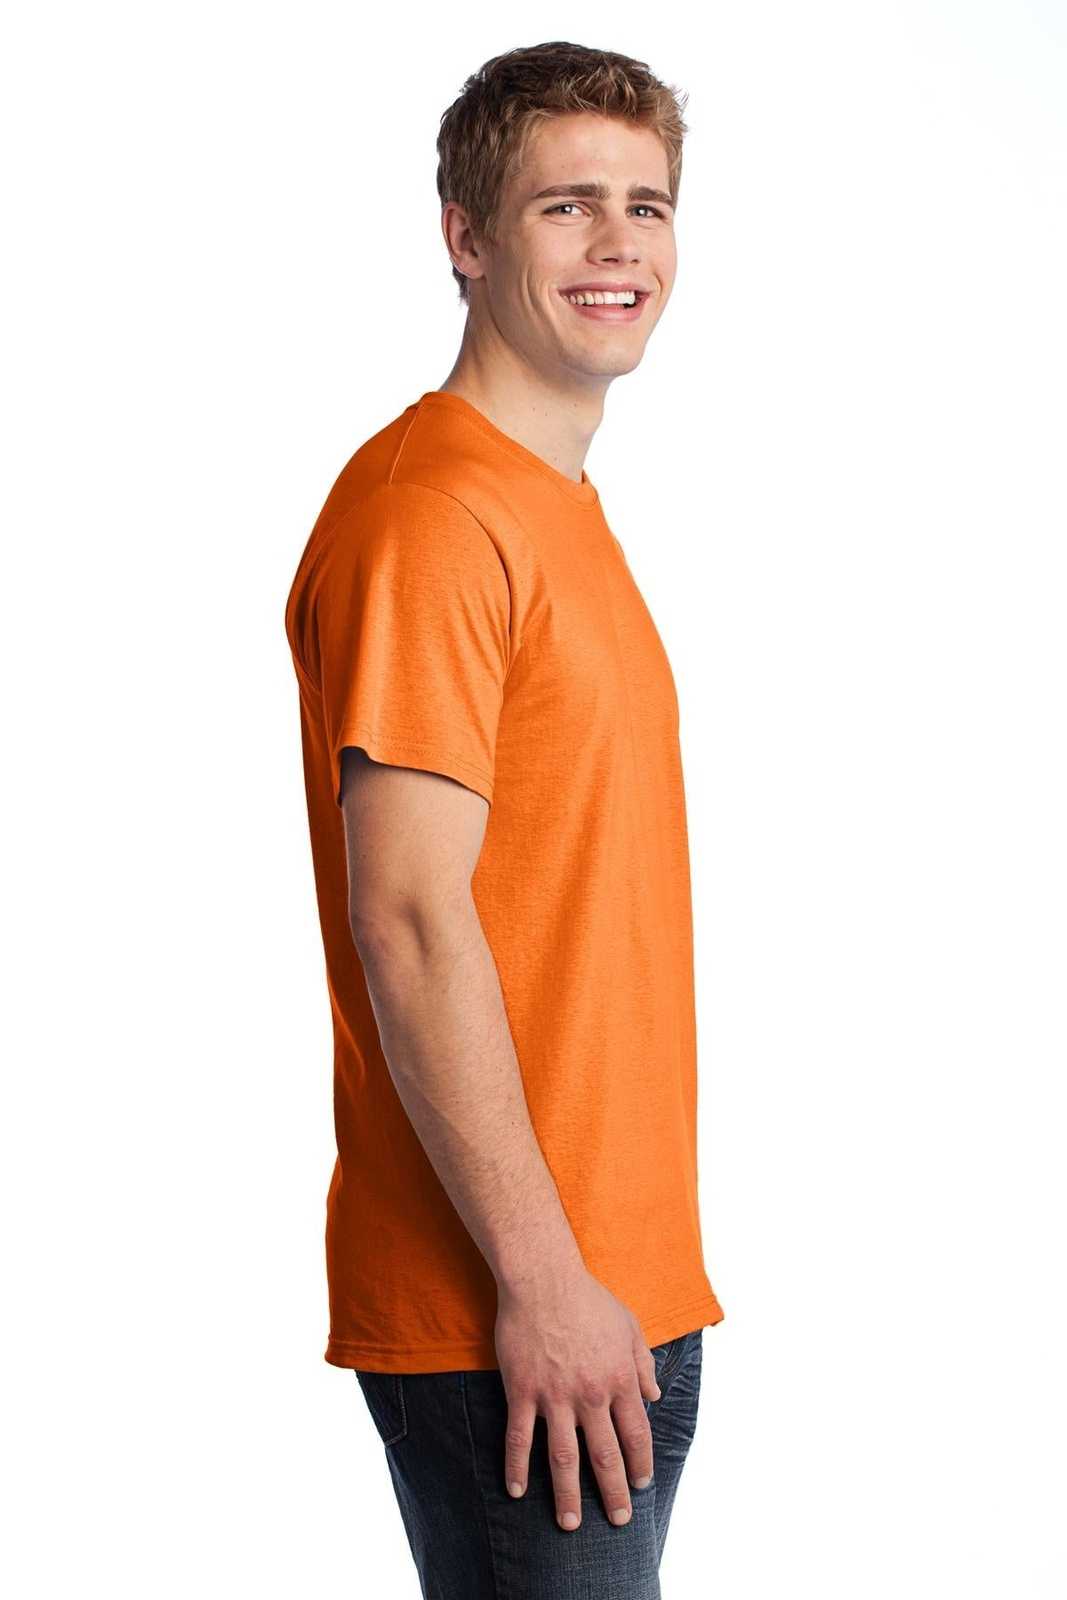 Fruit of the Loom 3930 HD Cotton 100% Cotton T-Shirt - Tennessee Orange - HIT a Double